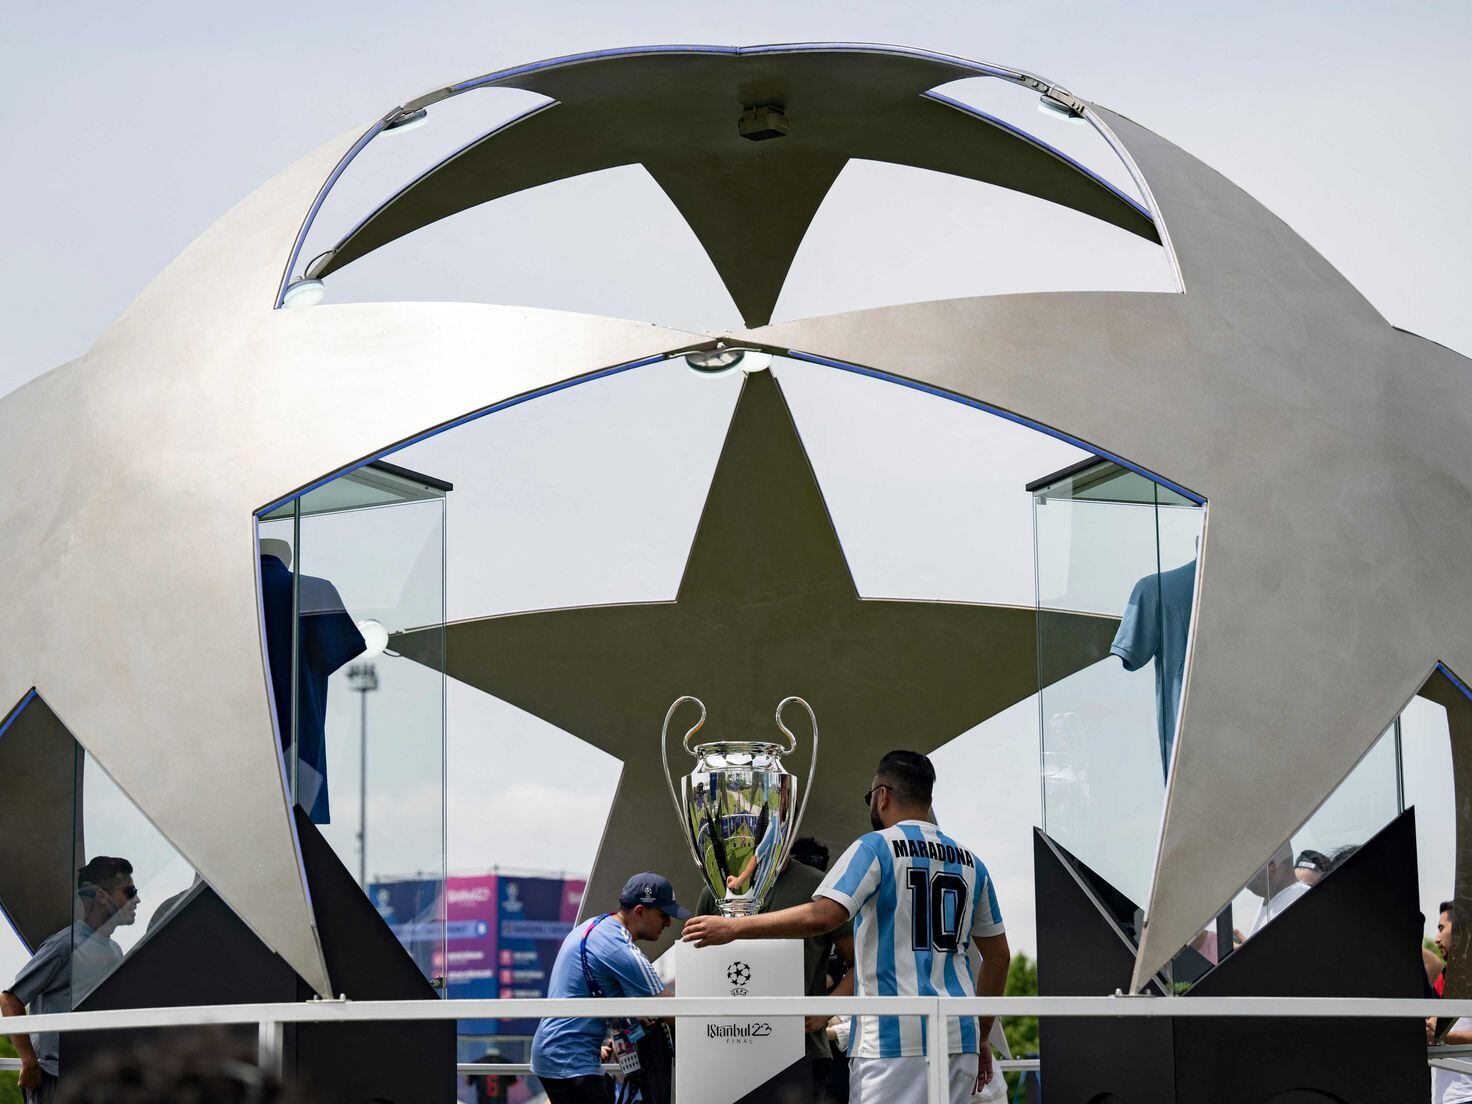 Champions League 2022-23 prize money: How much will winners of Man City vs  Inter clash get?